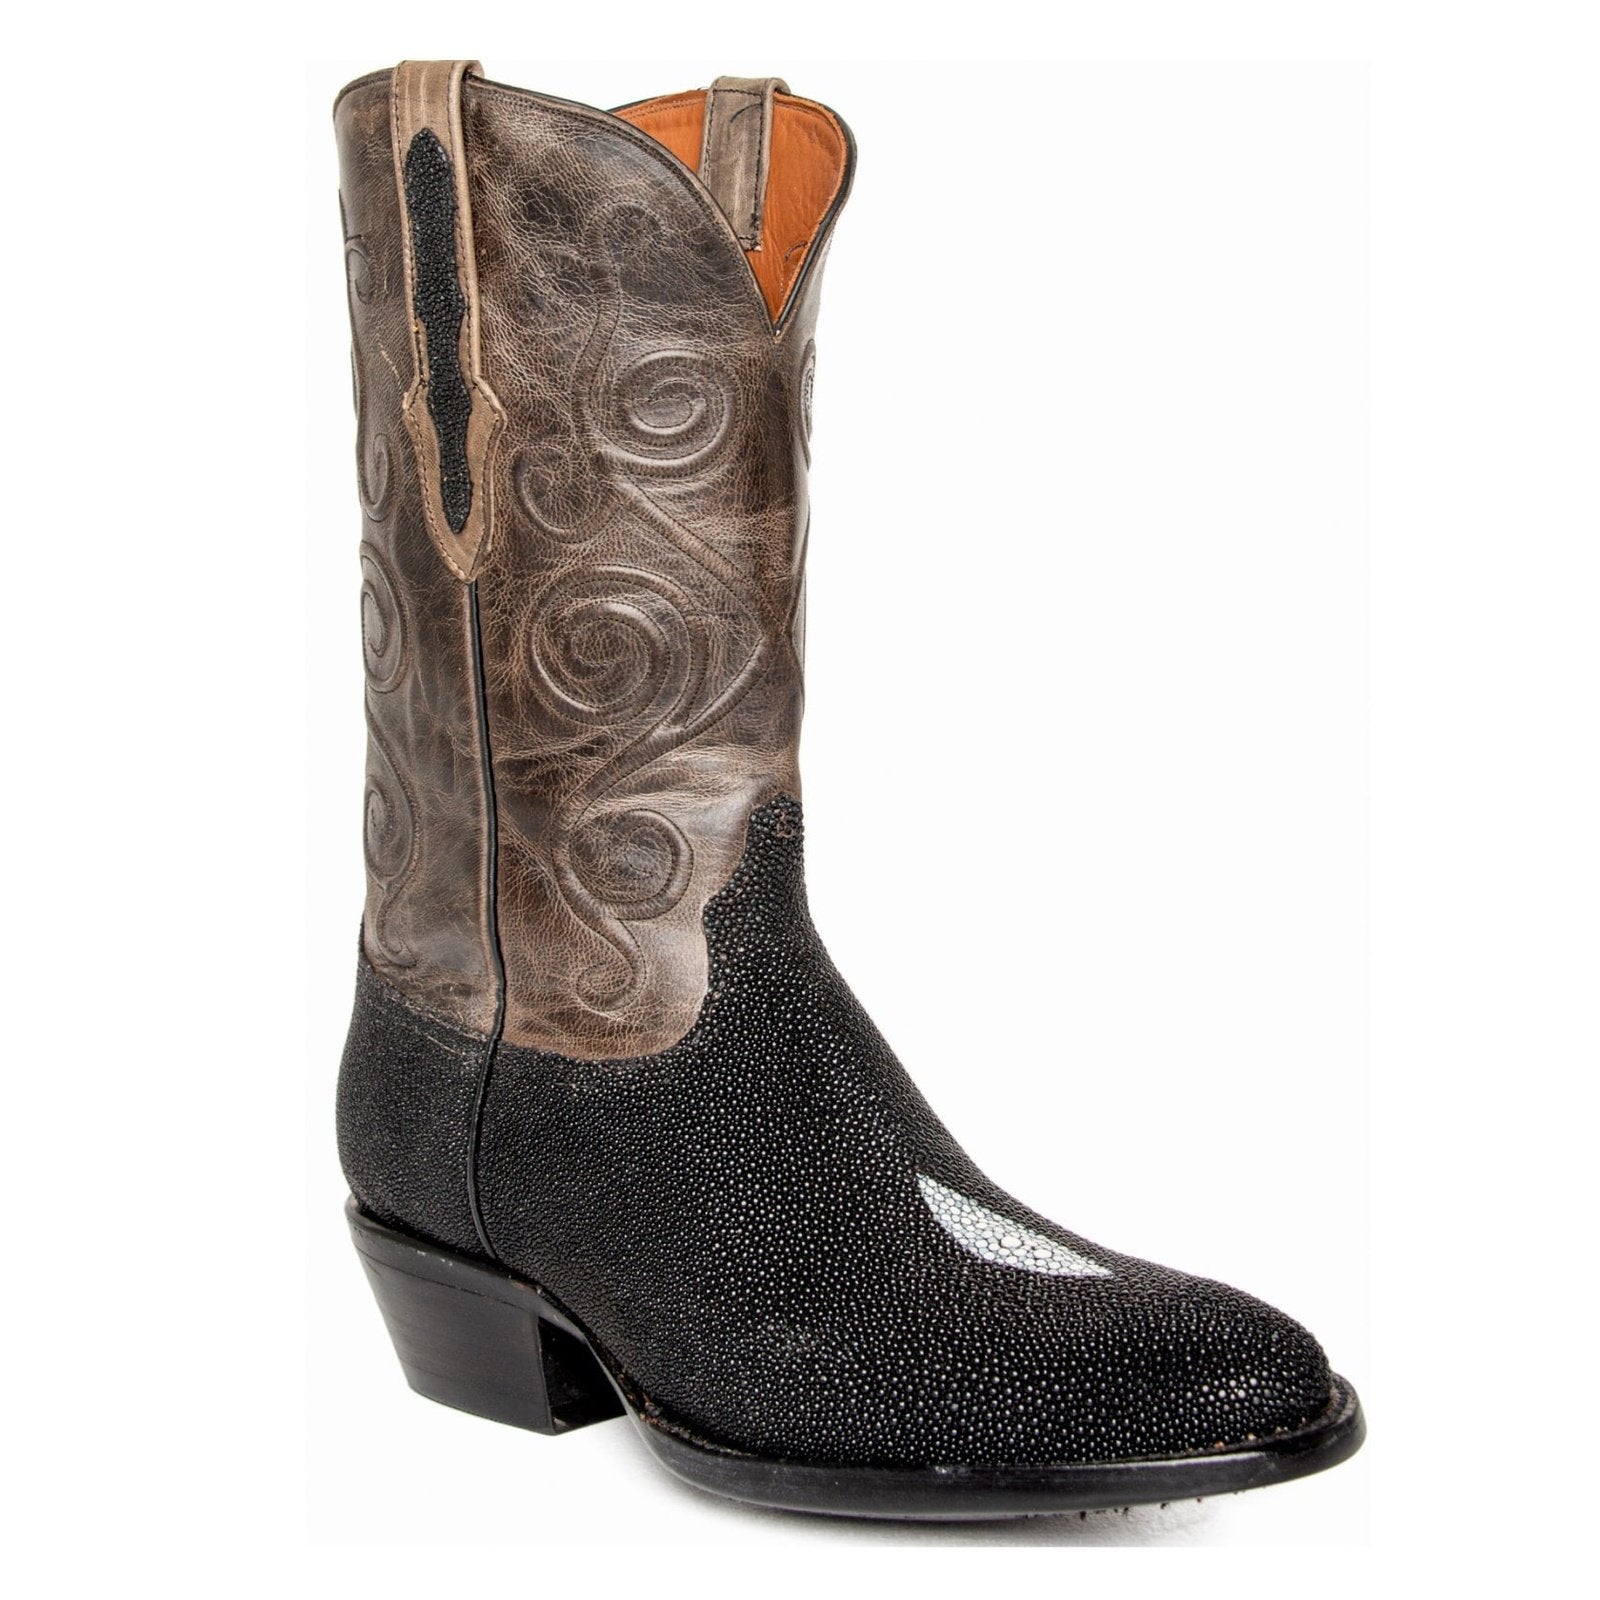 Black Jack Men’s Cowboy Boots 13" Exotic Sting Ray with Calf Shaft 13765